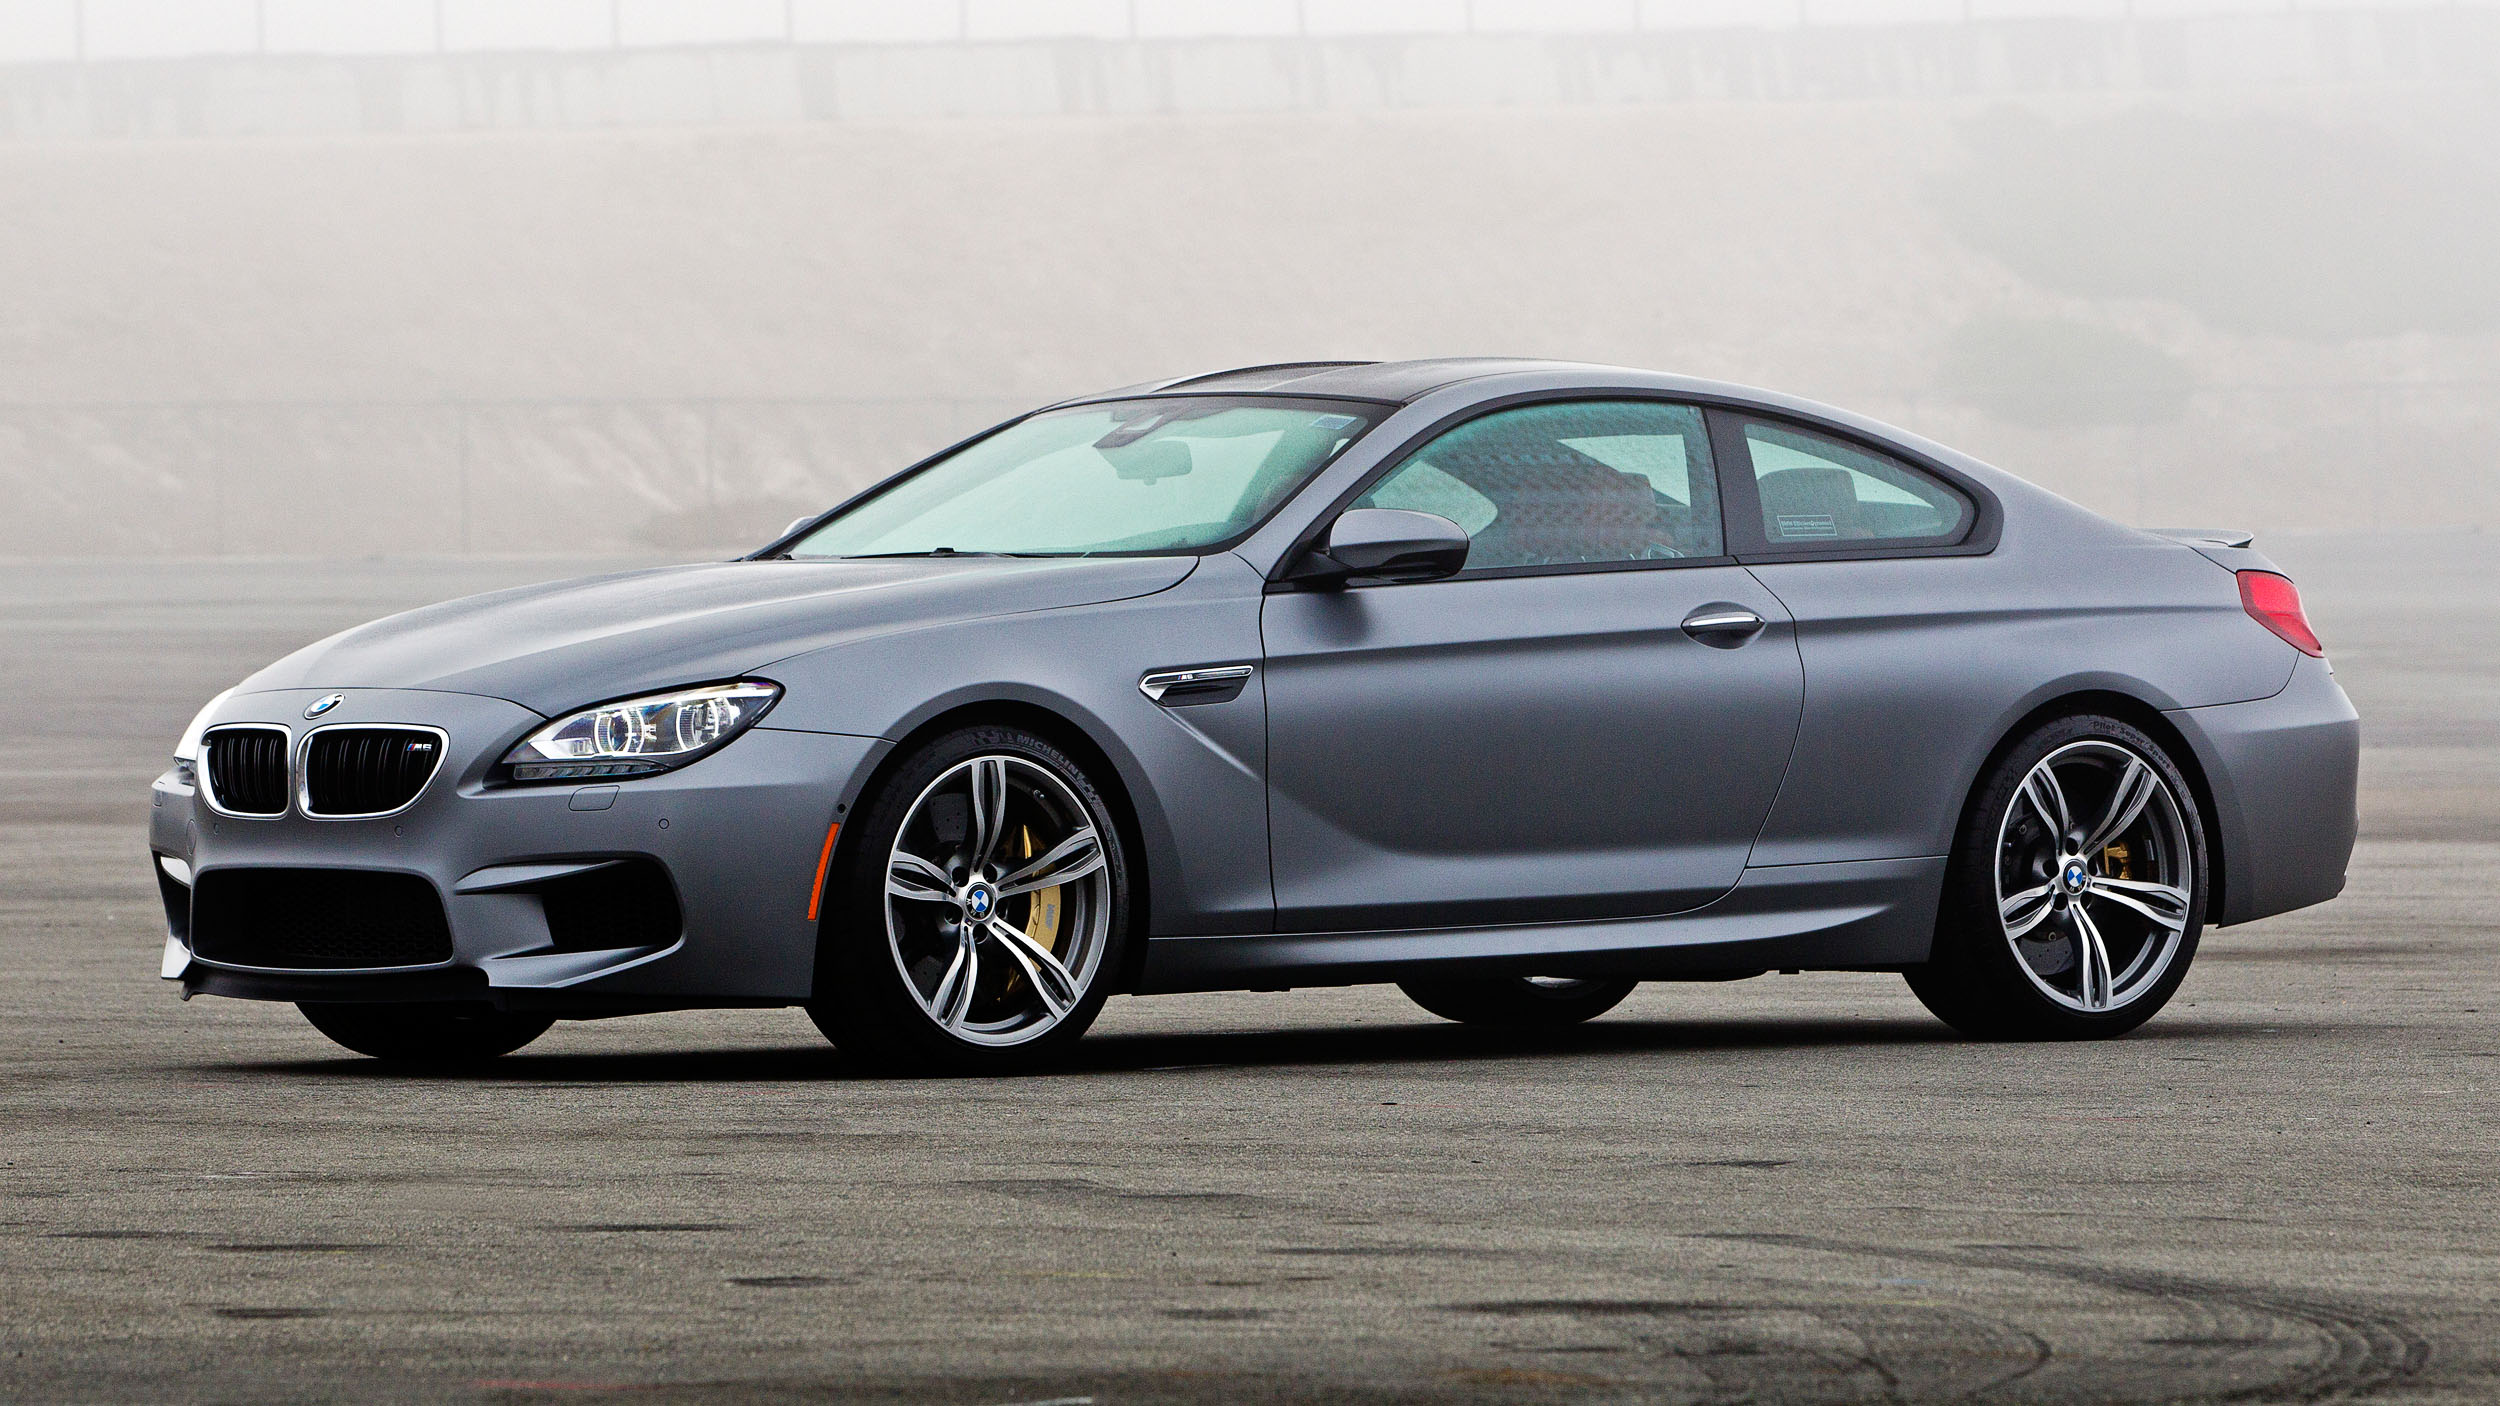 High Resolution Wallpaper | BMW M6 Coupe 2500x1406 px